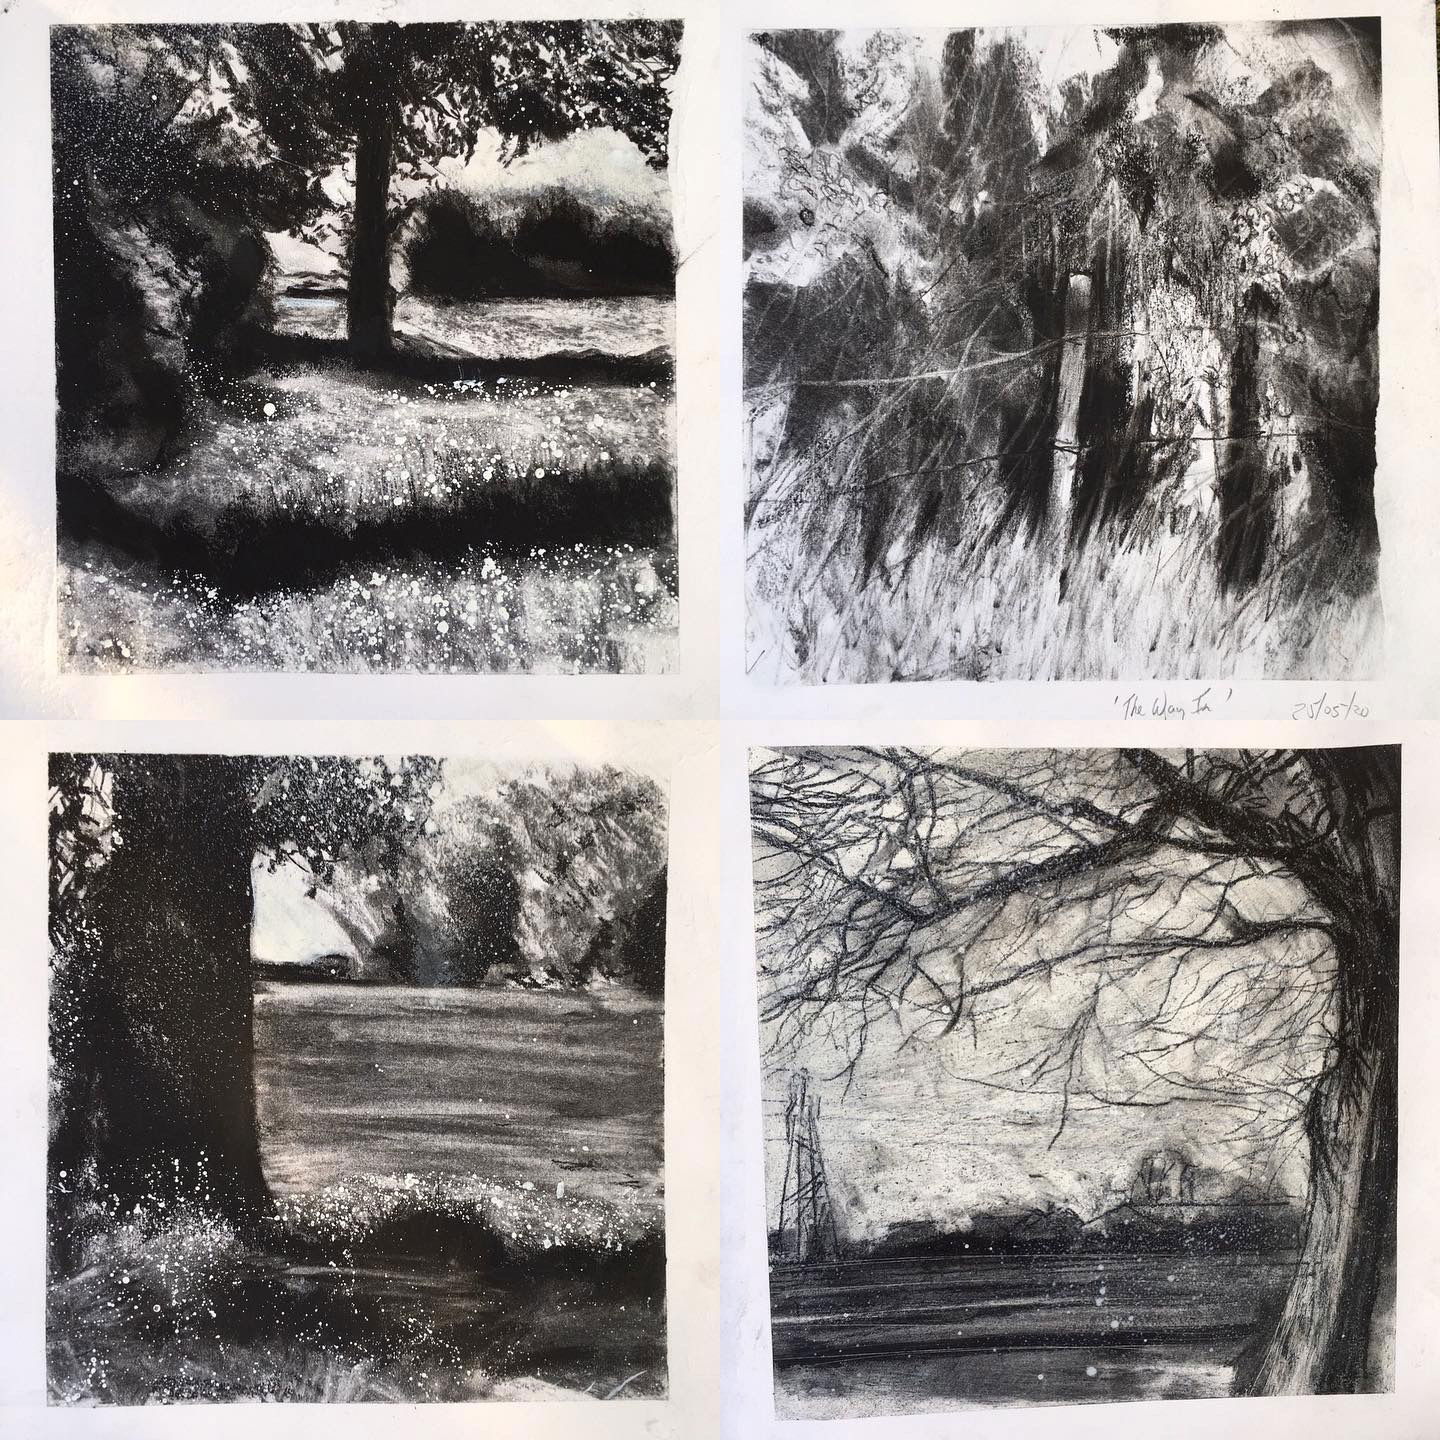 4 Charcoal sketches, near wildwood